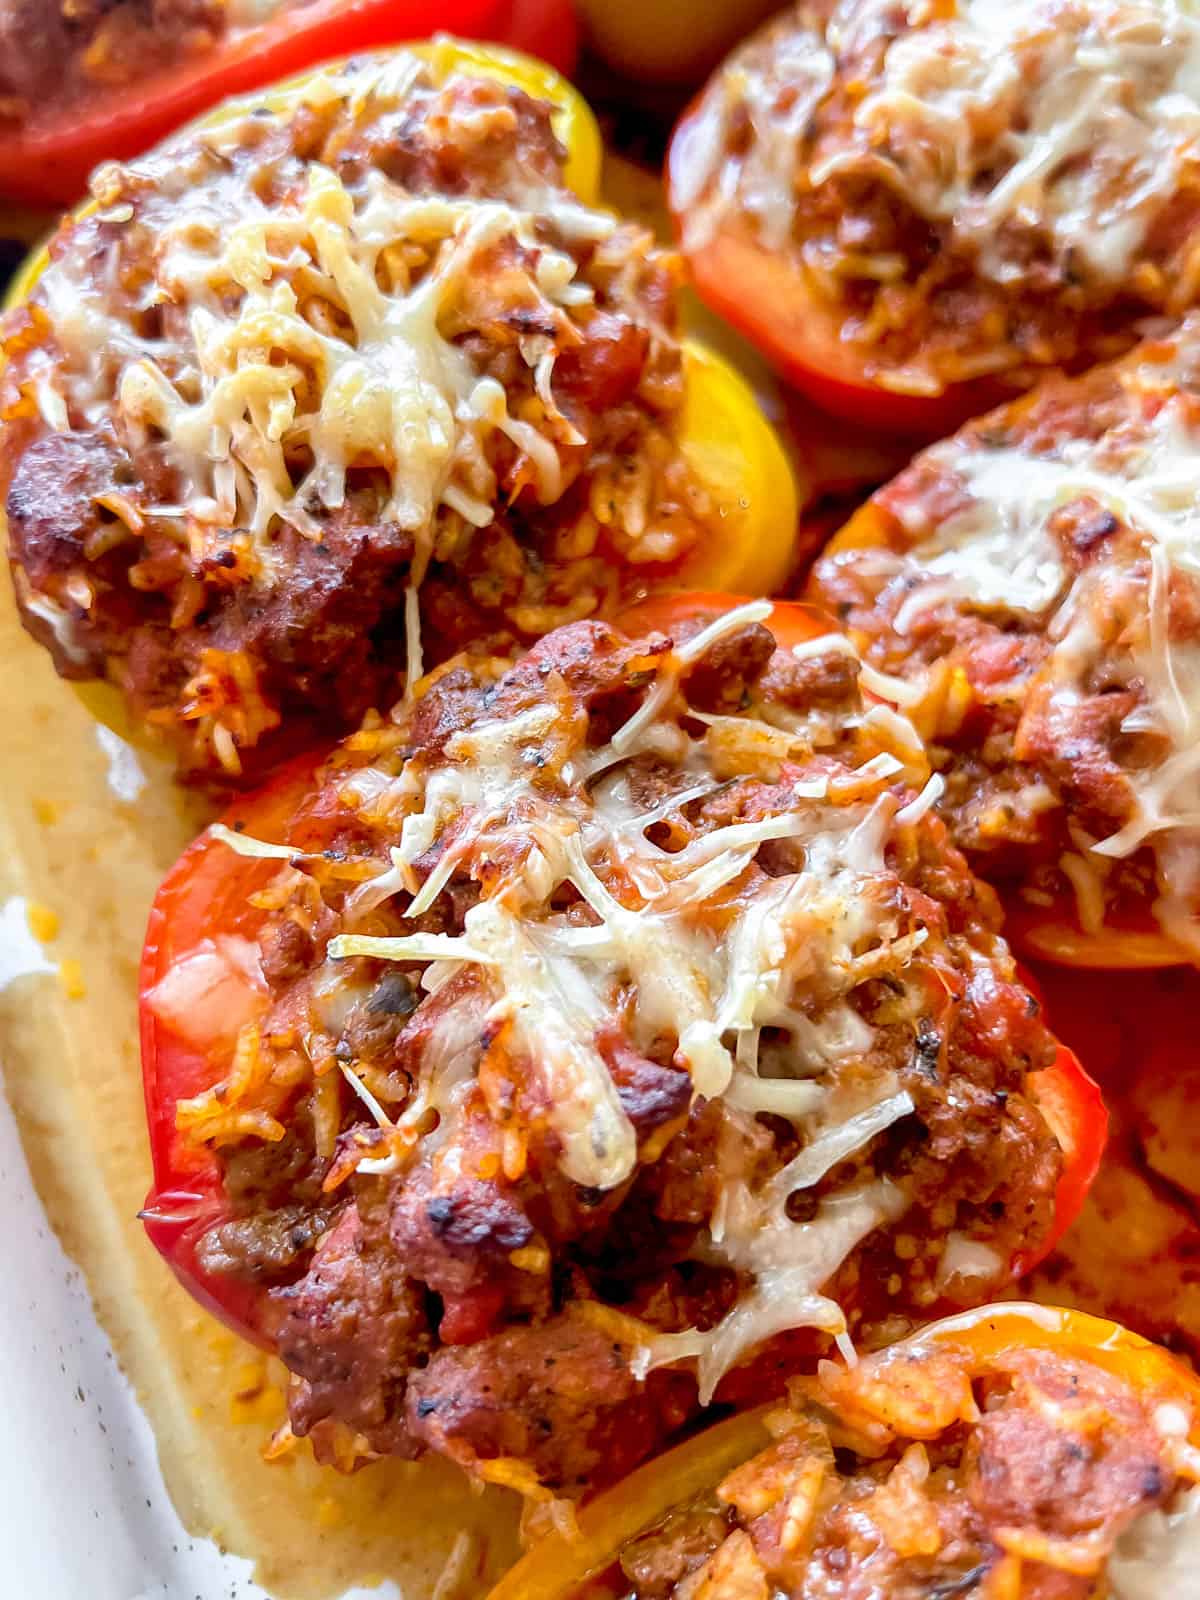 Healthy stuffed peppers with melted cheese on top freshly cooked.